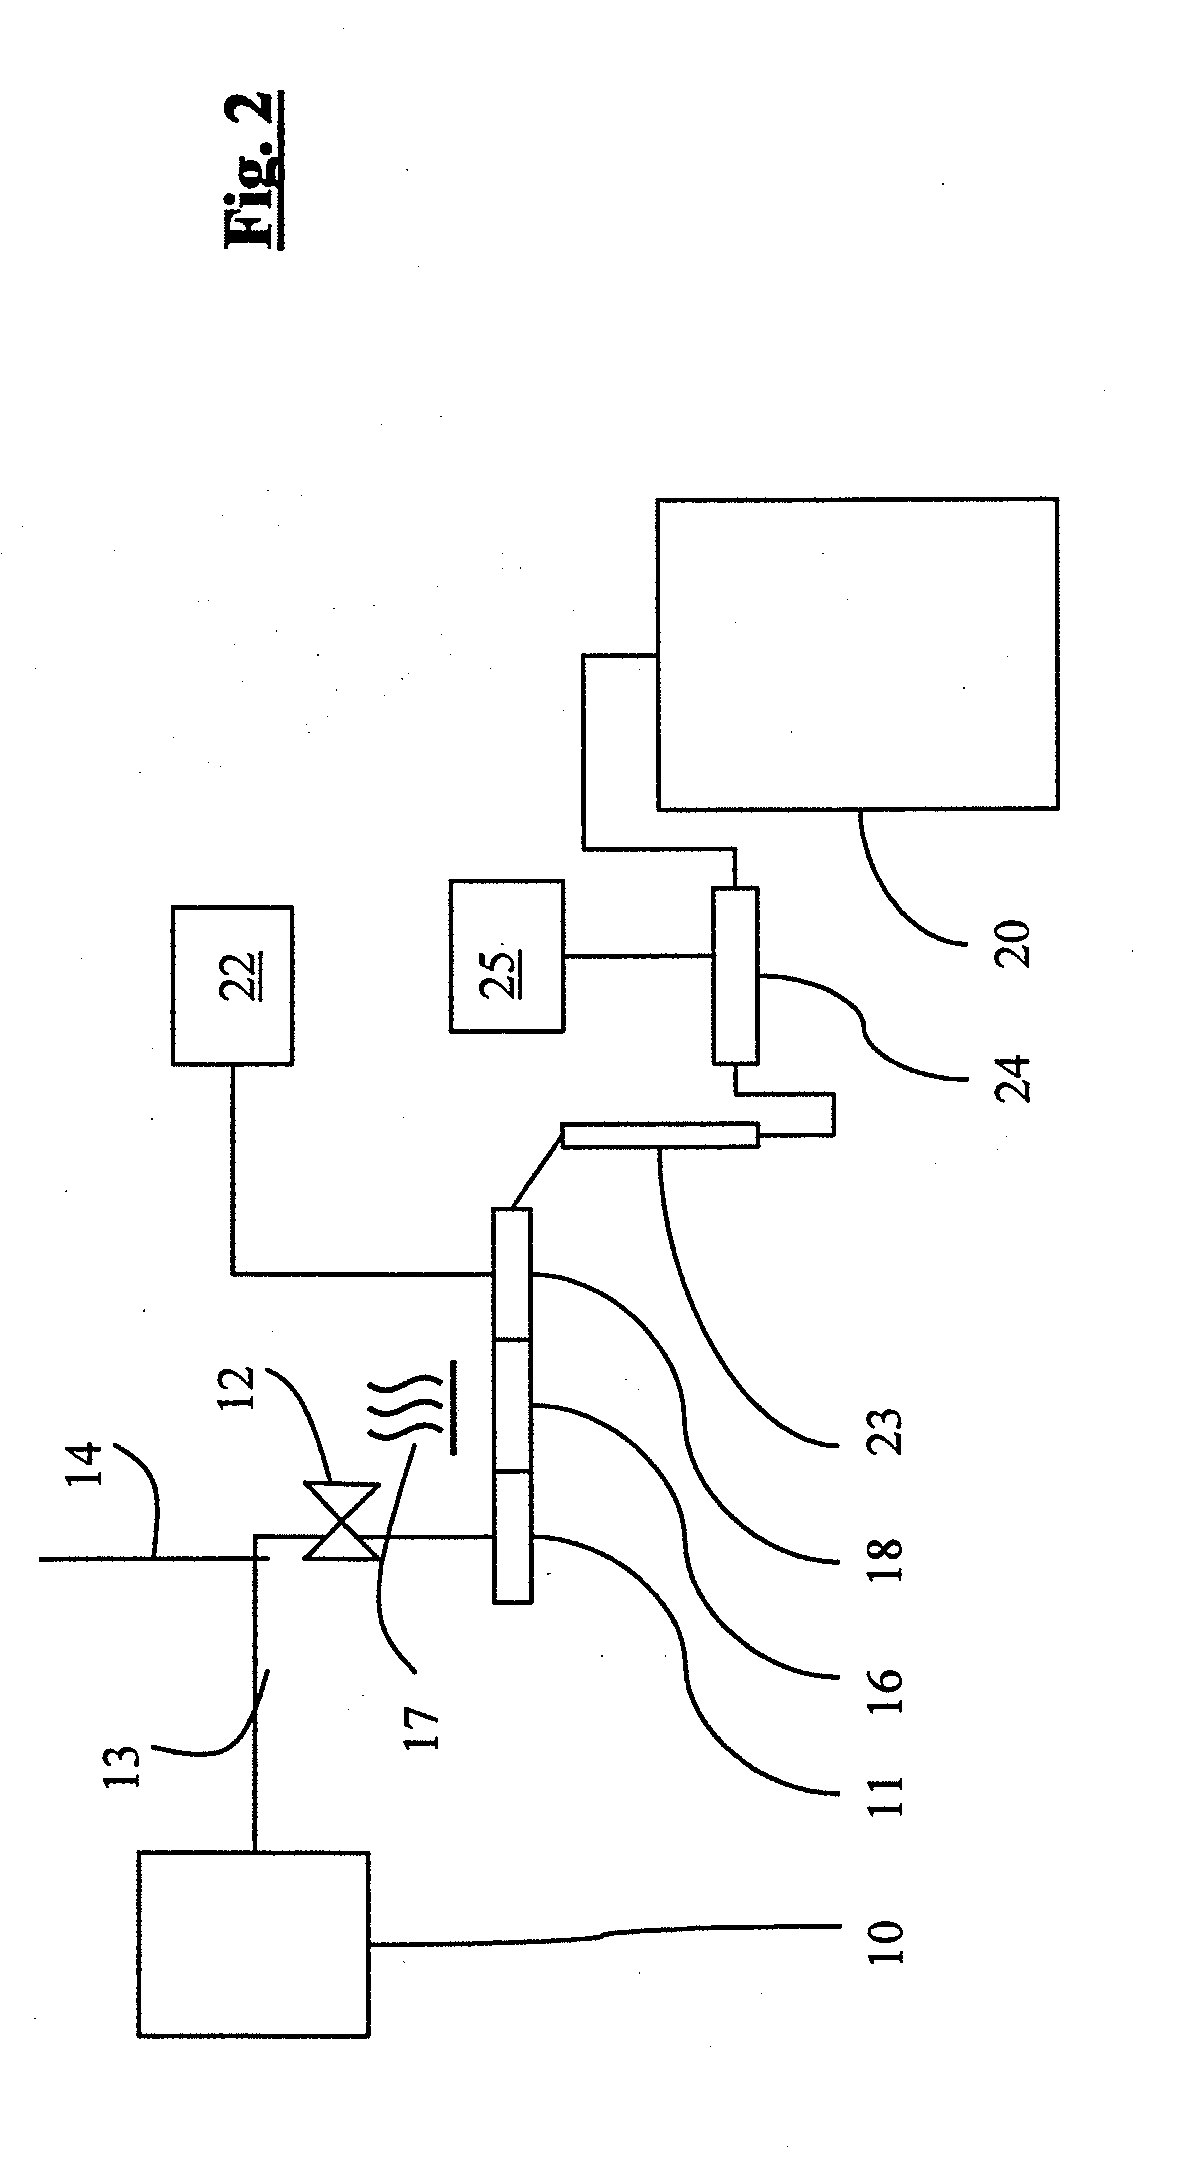 Method and device for isotopic ratio analysis